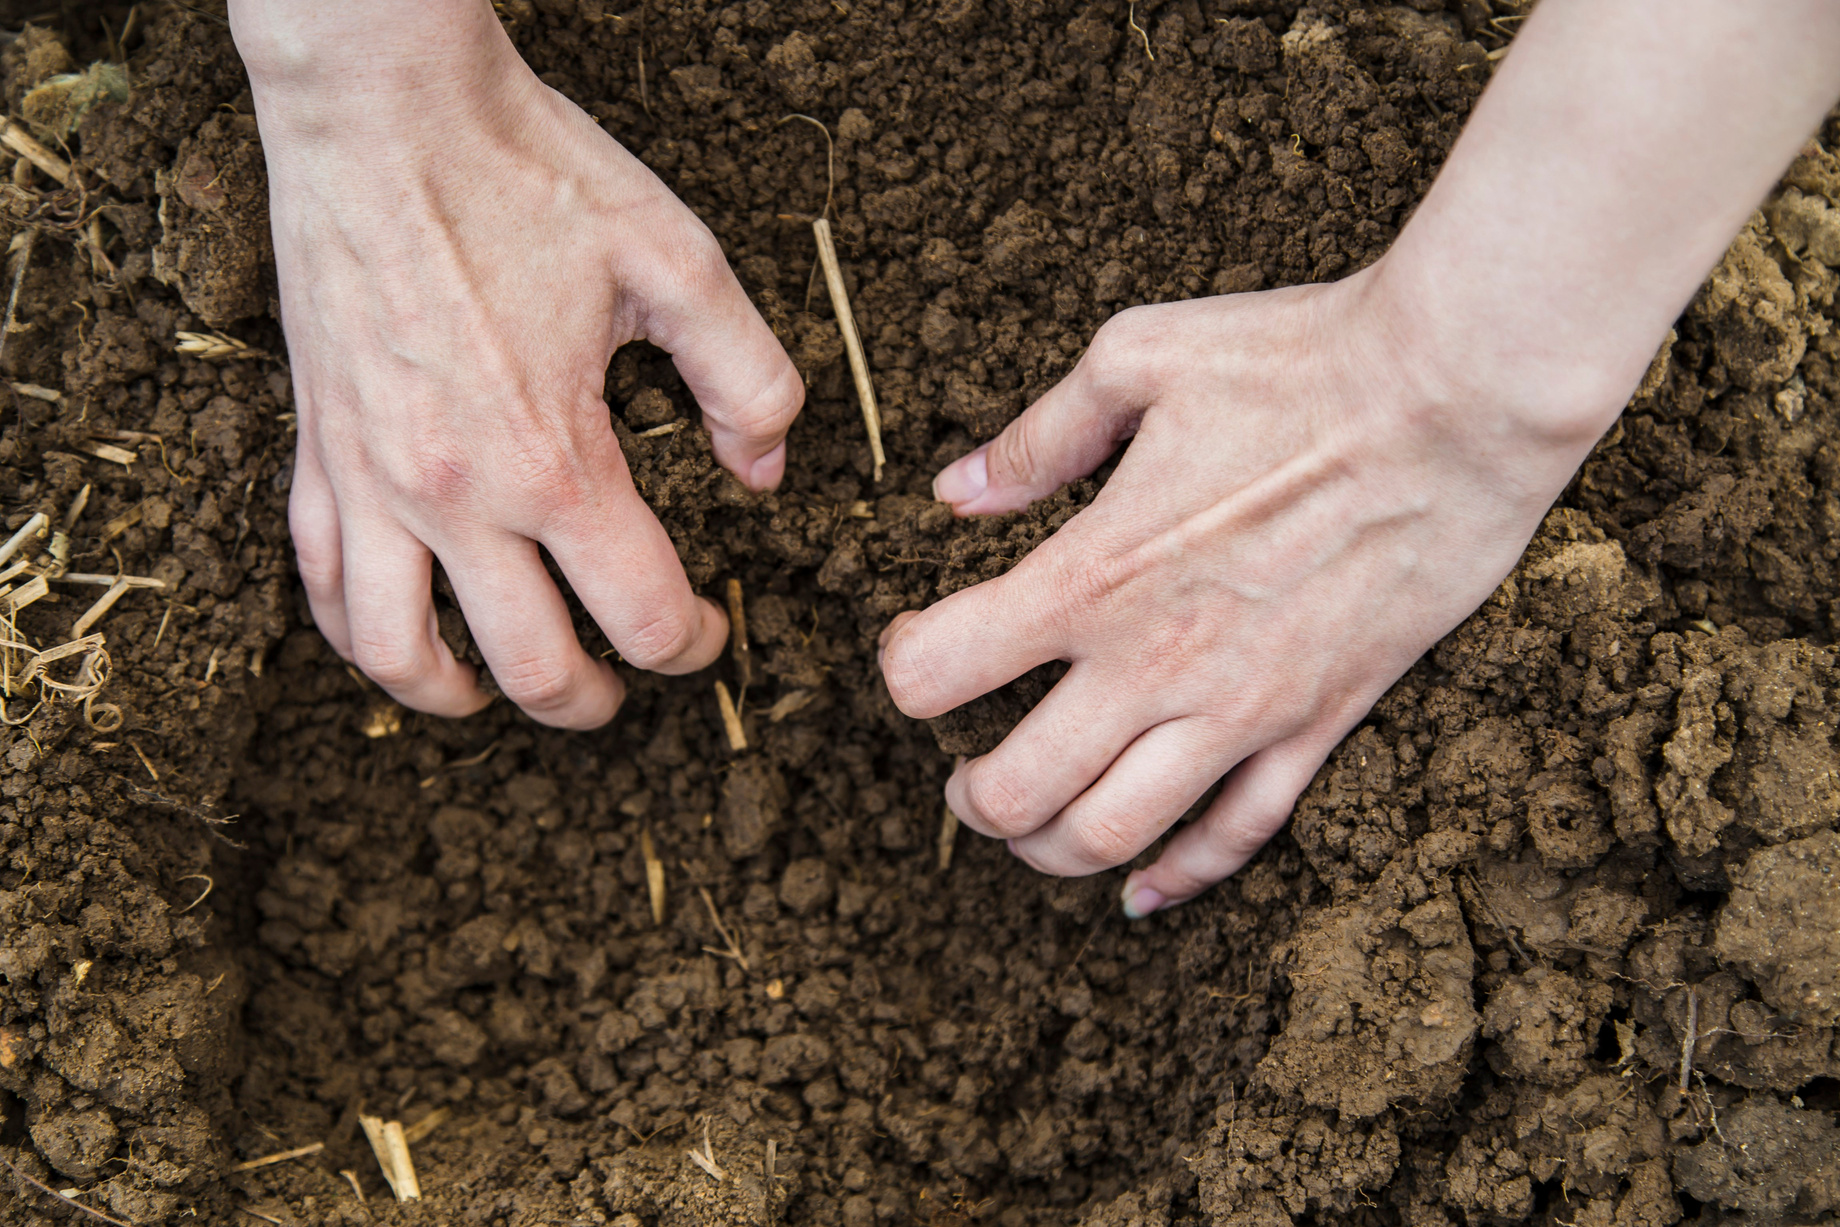 Woman hands digging ground